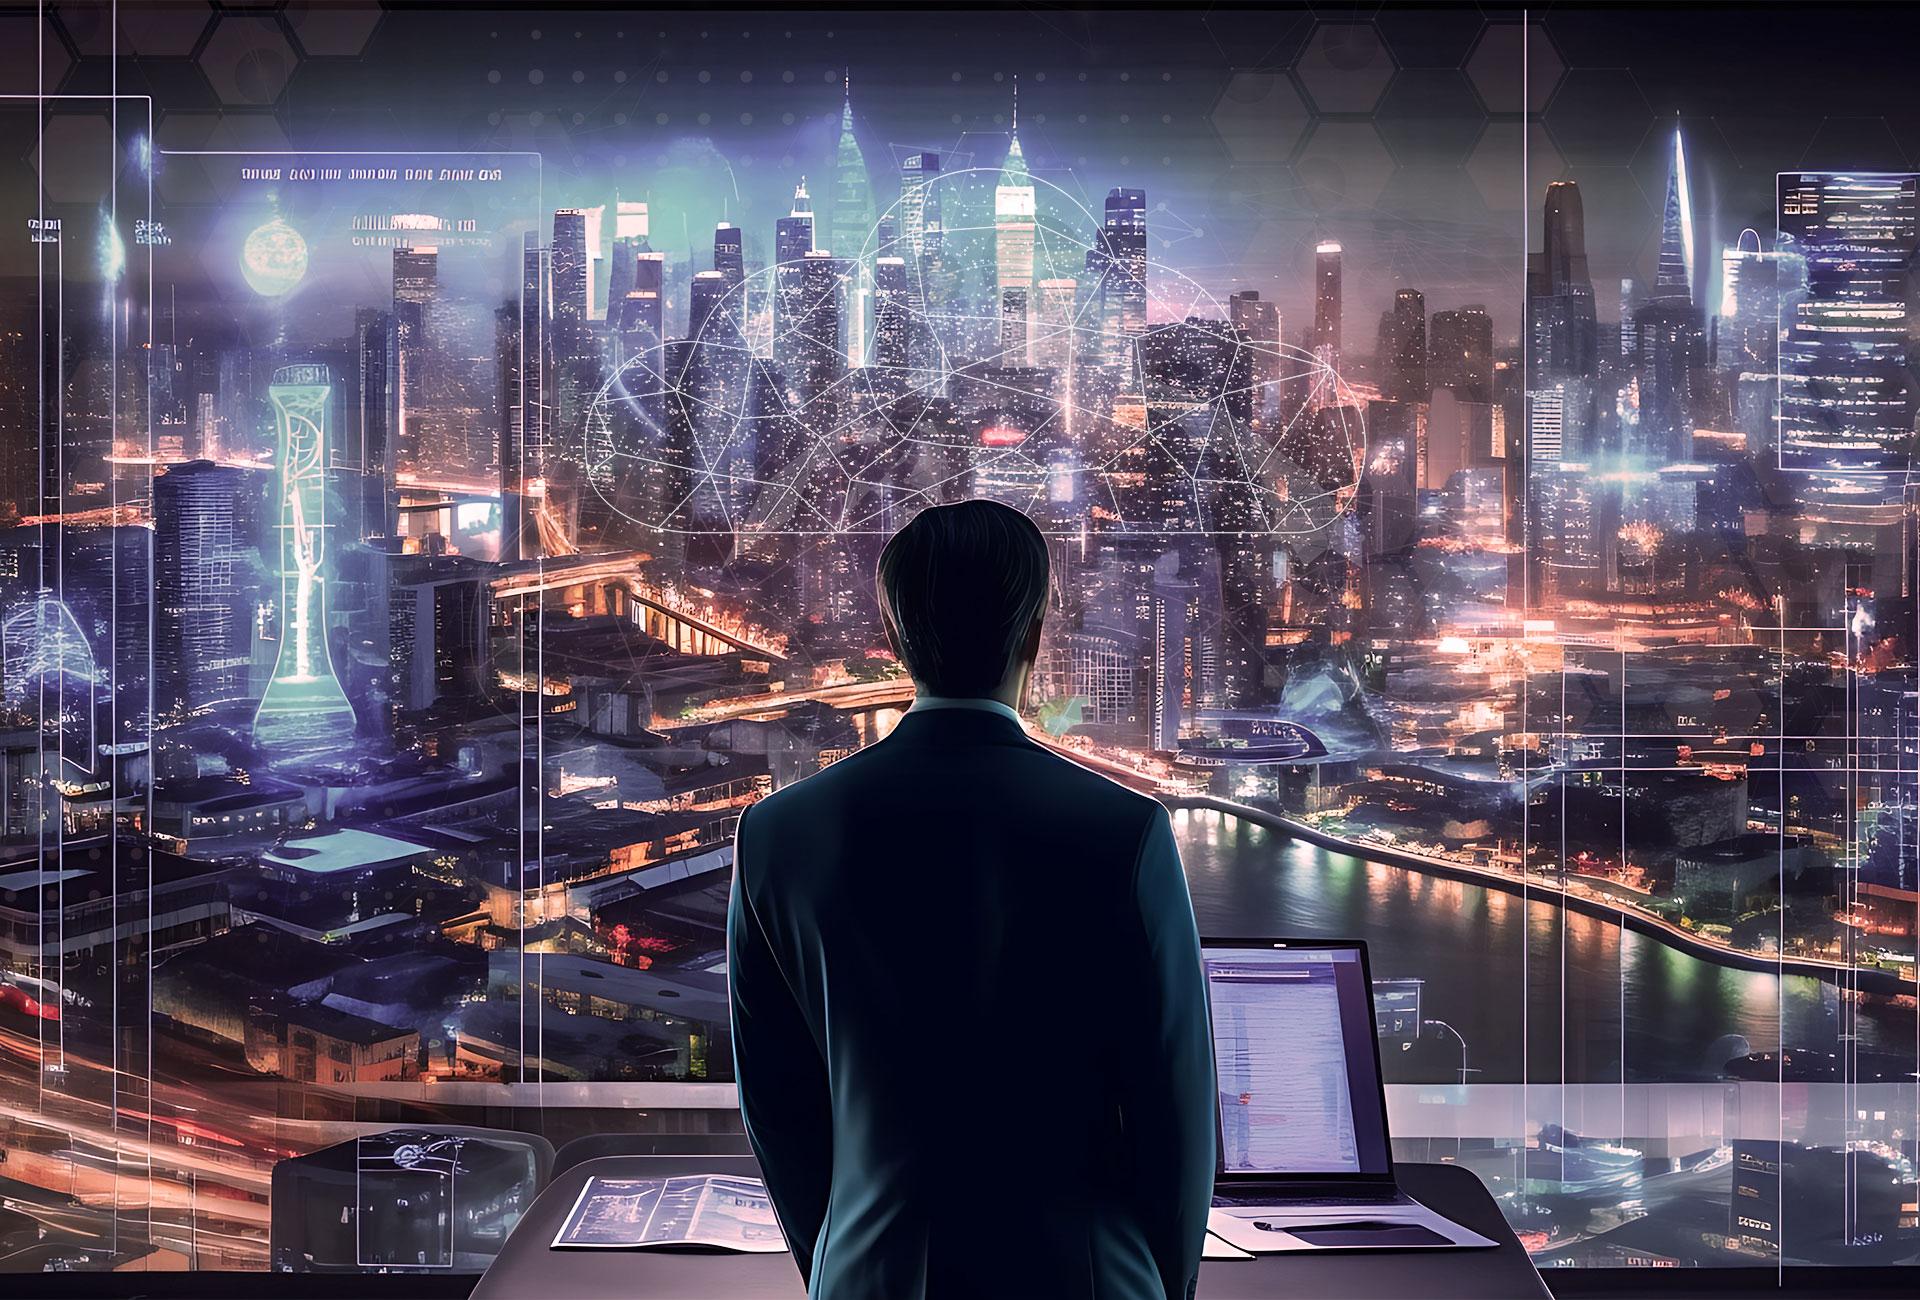 A businessman stands in front of his office window, gazing upon a futuristic city nightscape.